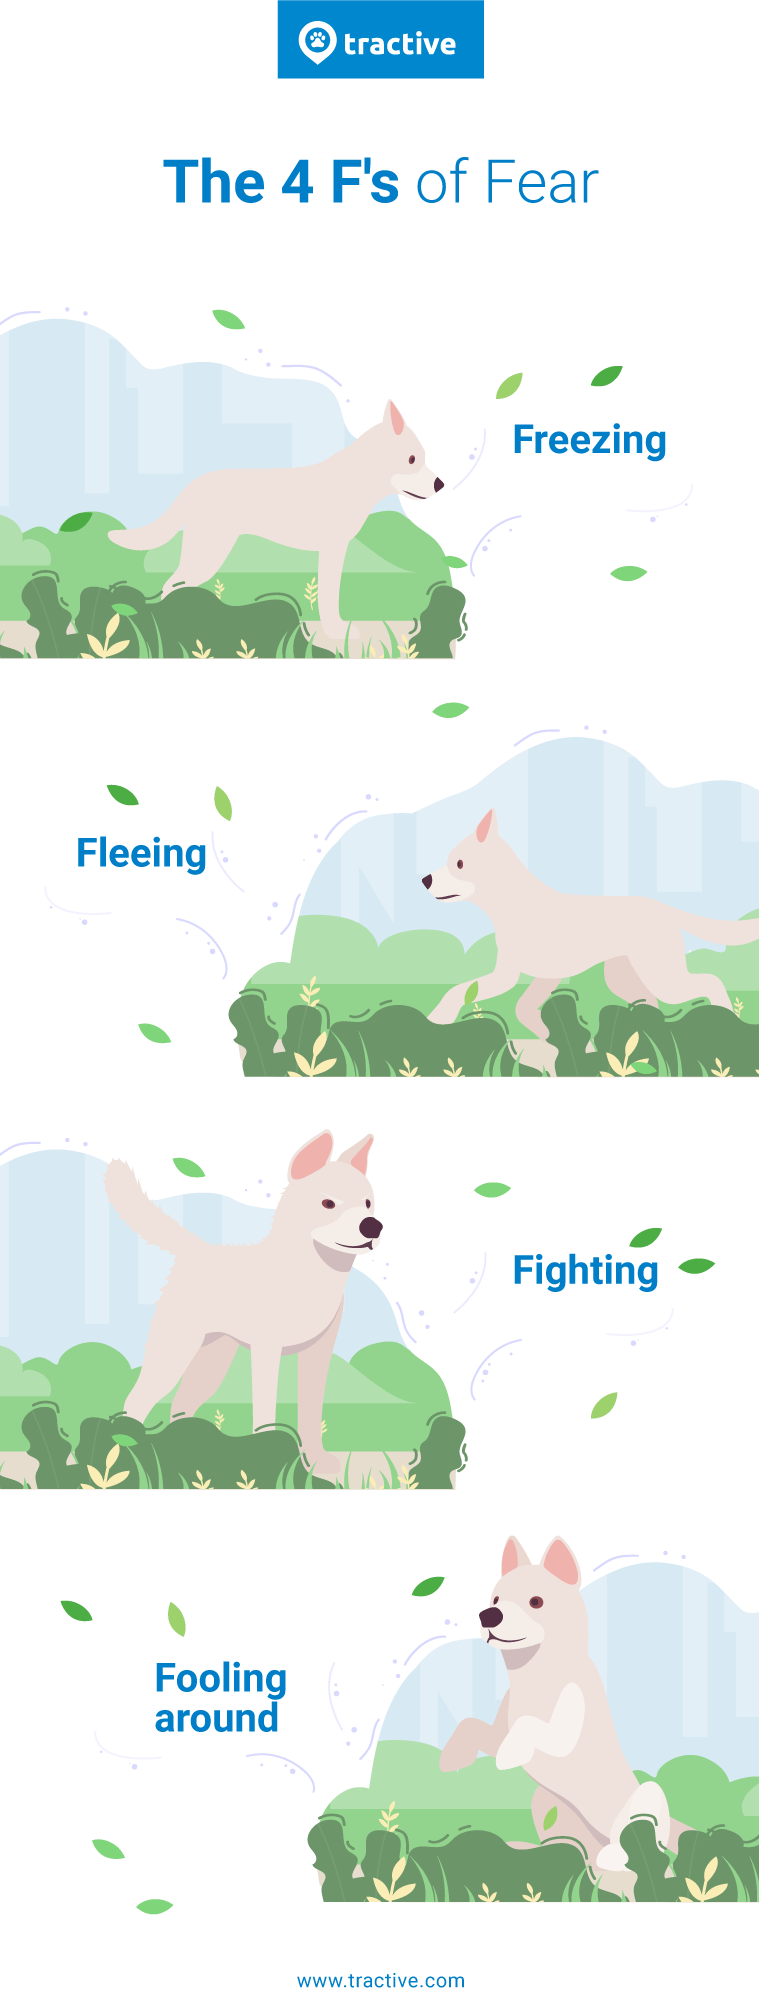 The 4 Fs of fear in dogs infographic